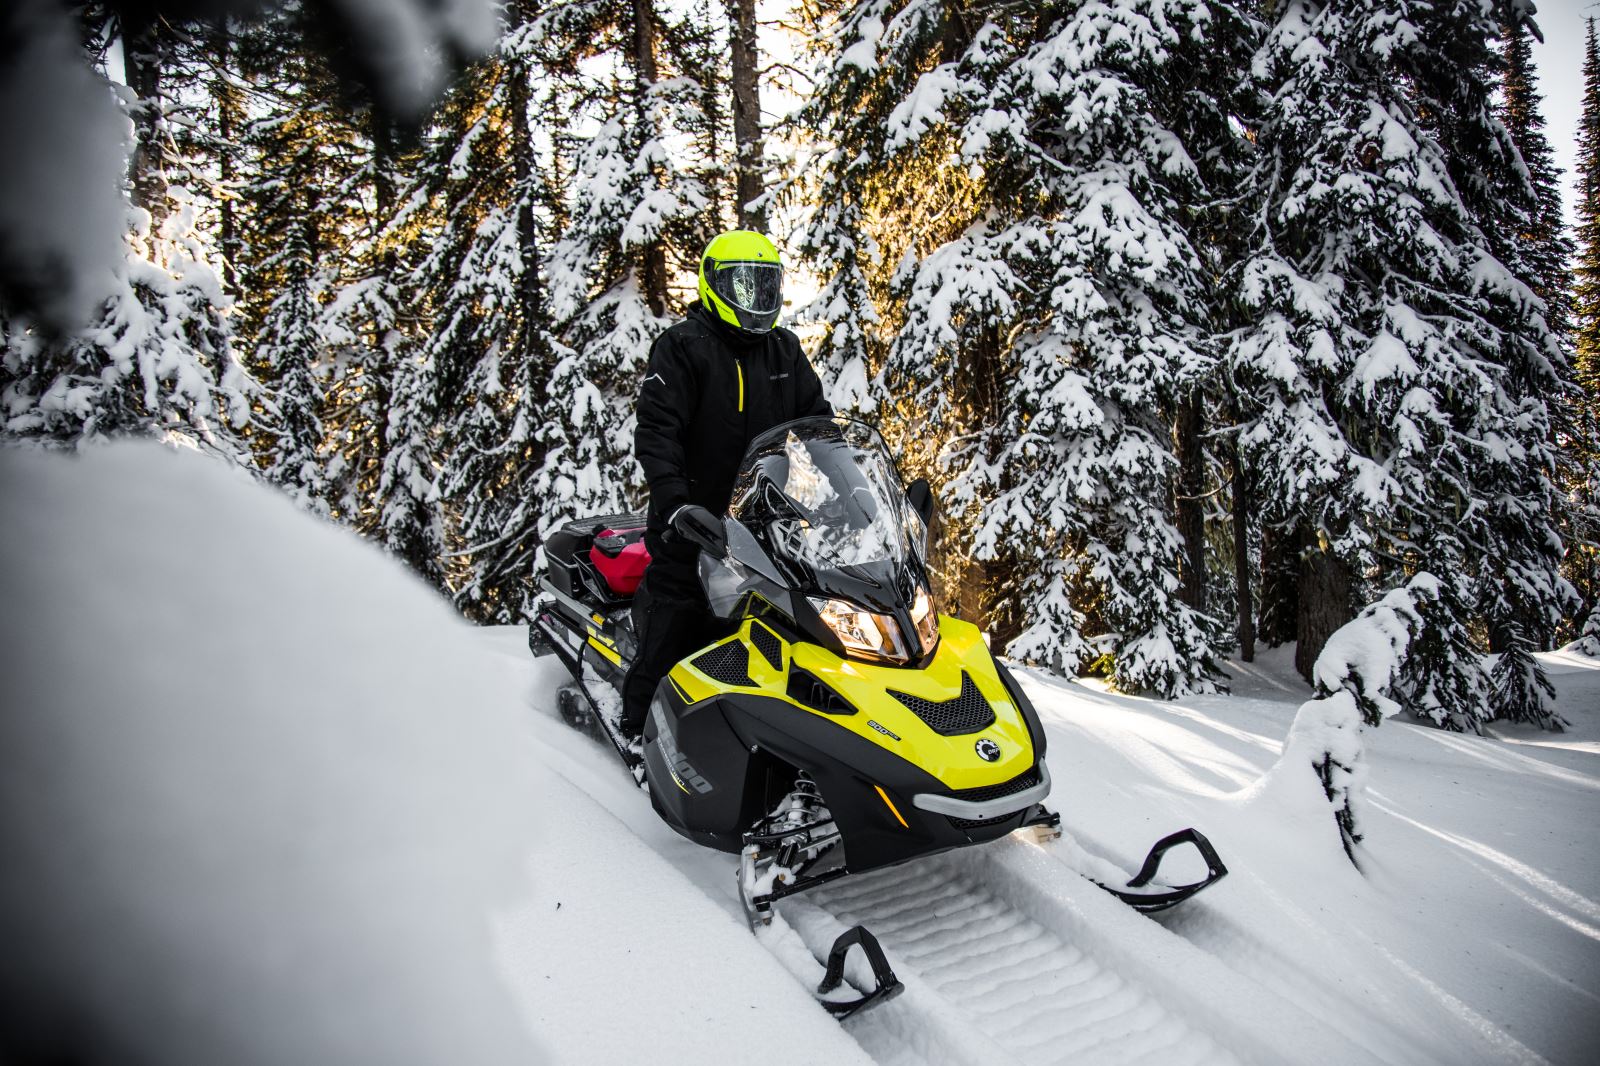 Ski-Doo Expedition le 900 Ace. Ski Doo Expedition 600 ETEC. BRP Ski Doo Grand Touring 900 Ace. Ski Doo Expedition SWT 900 Ace.